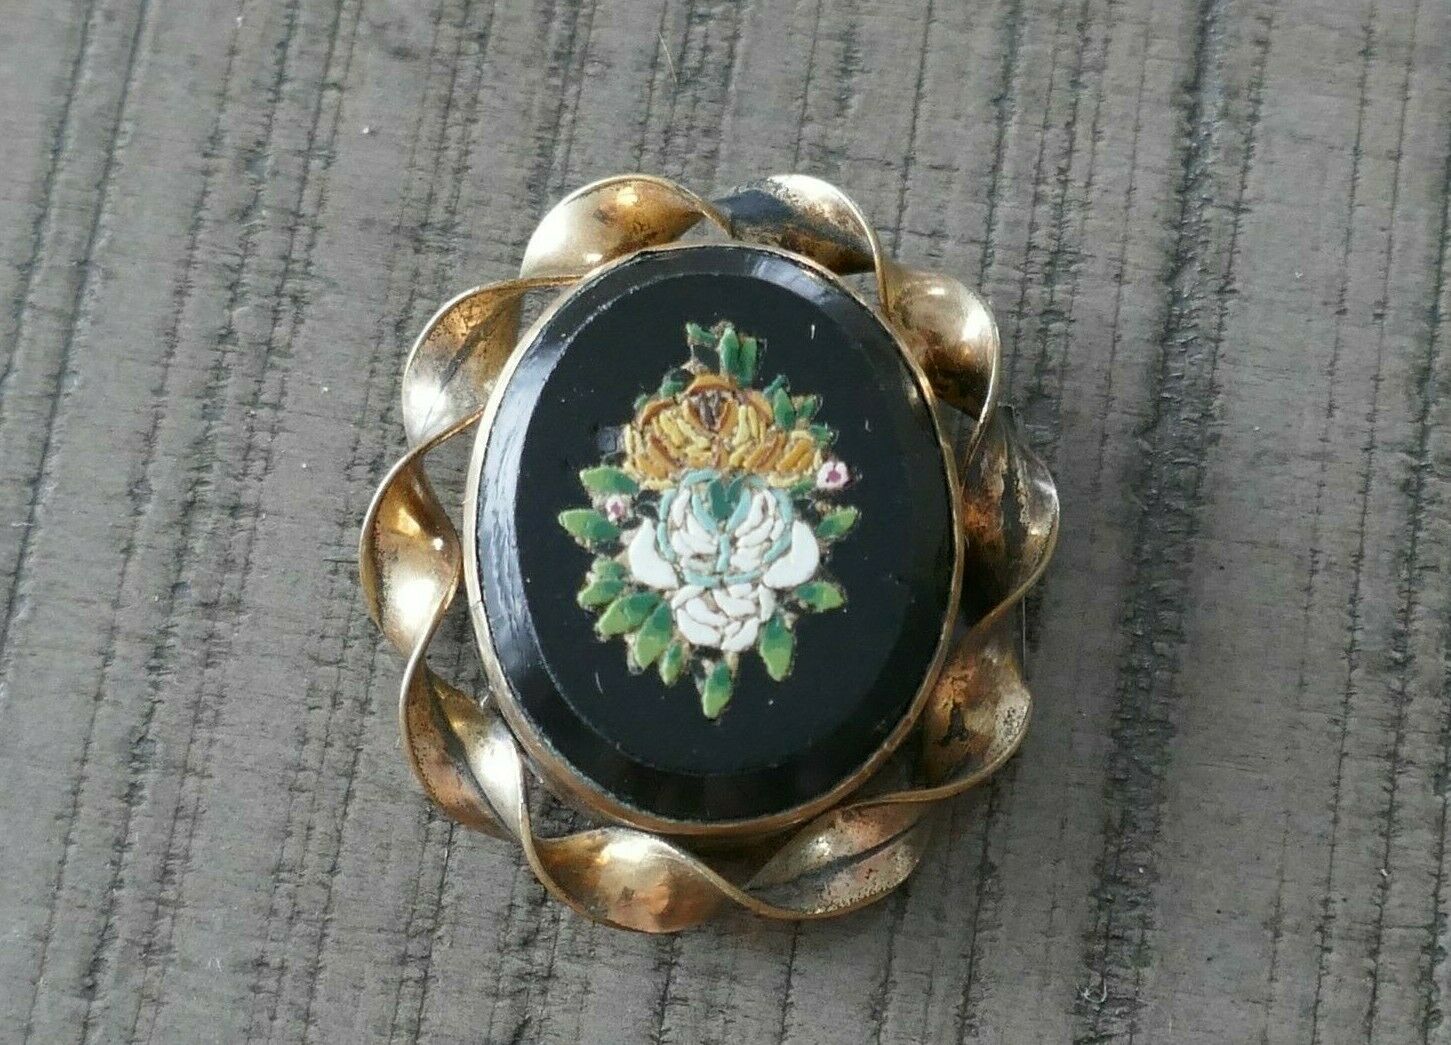 Antique Victorian Gold Tone Pietra Dura Floral Brooch / Pin - 8.0 Gm. - As Found